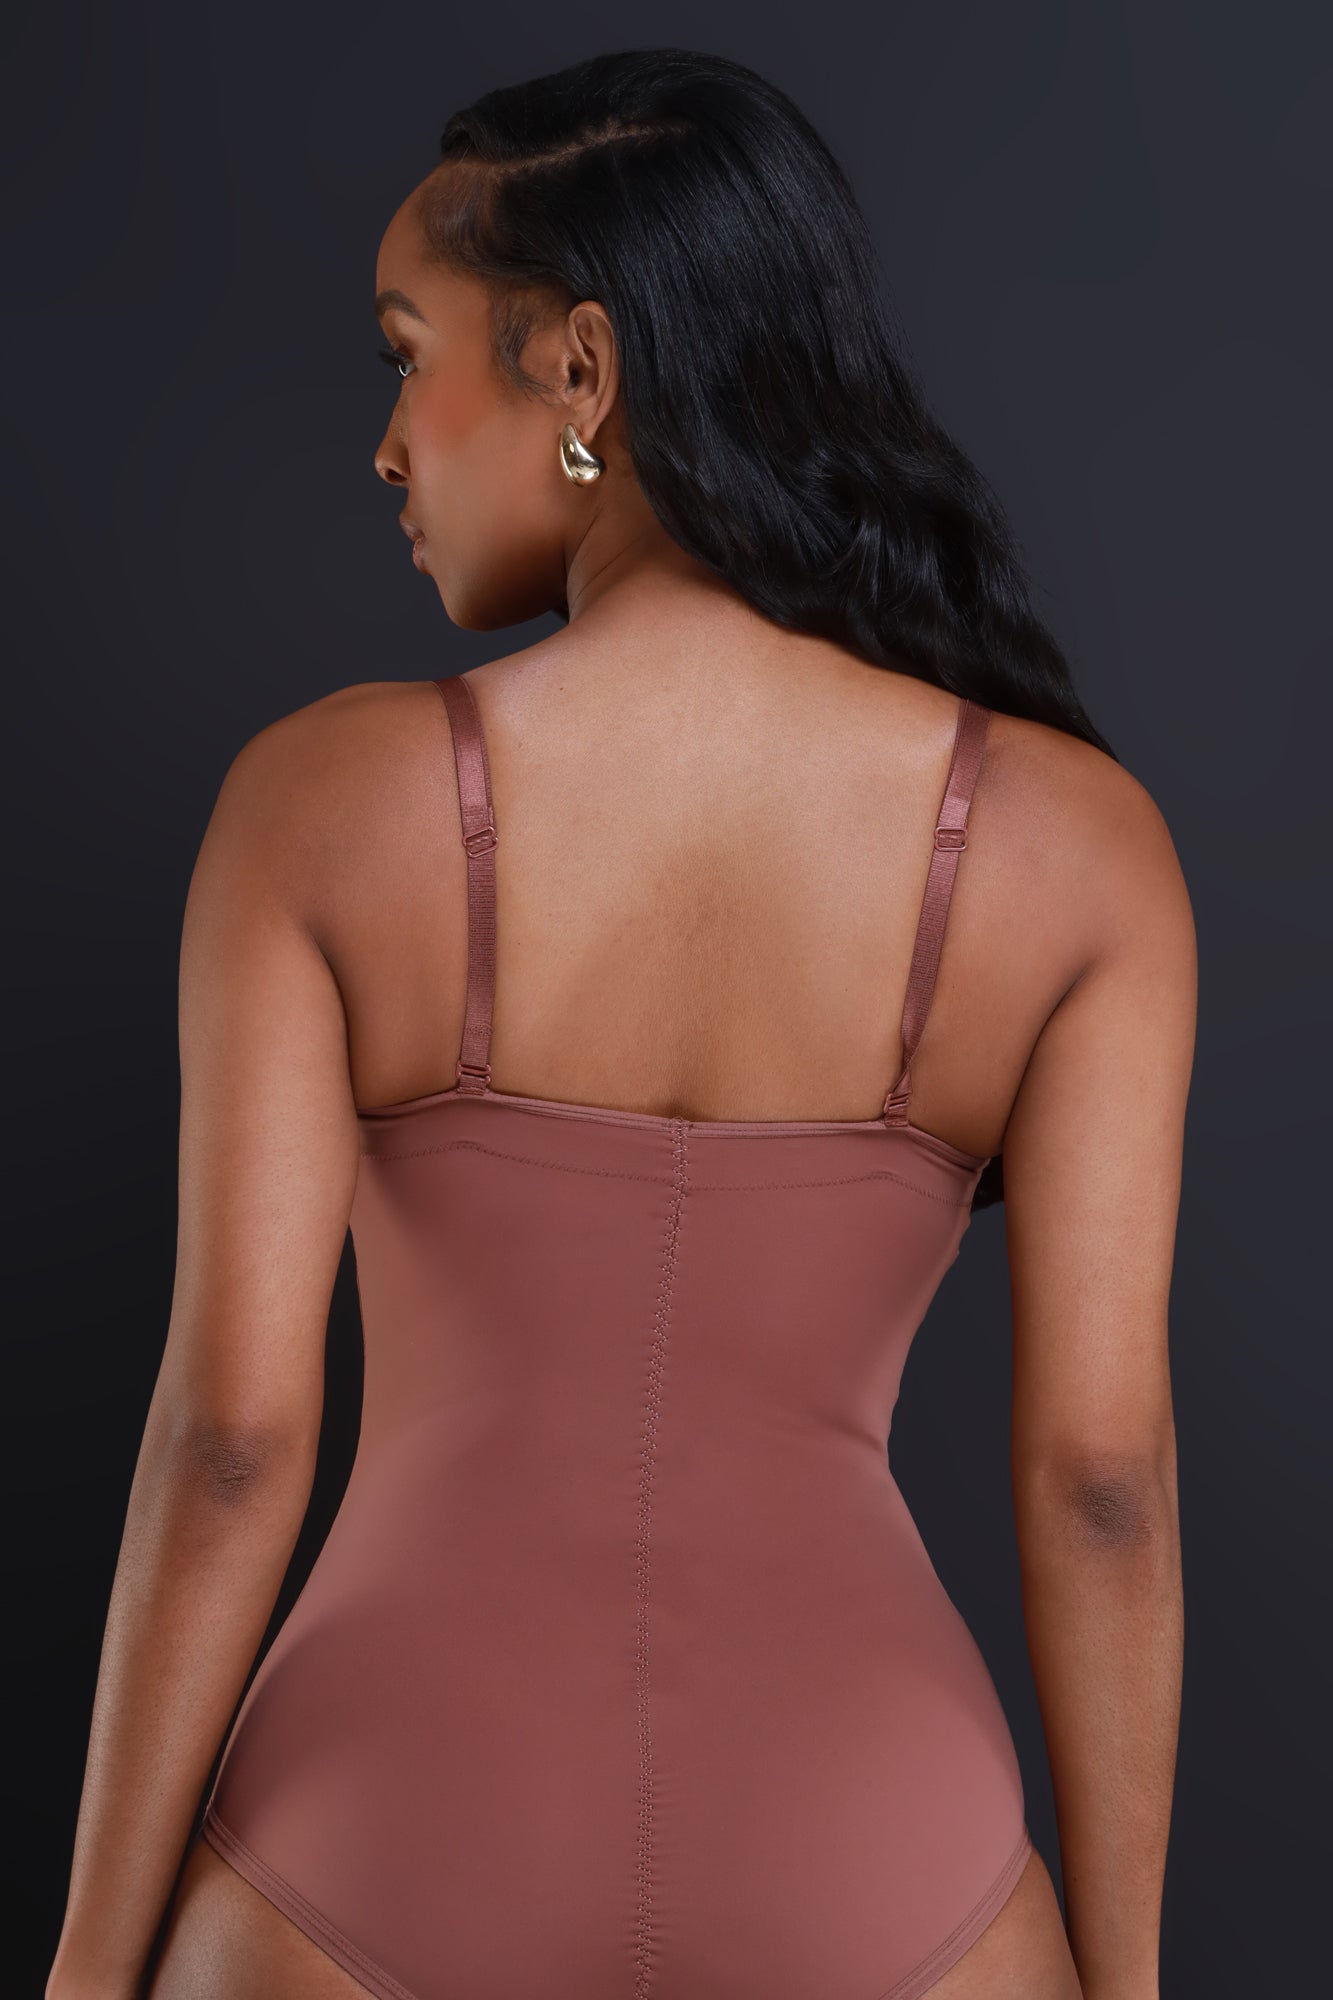 Thick Ribbed- Bodysuit/Shapewear - Brown